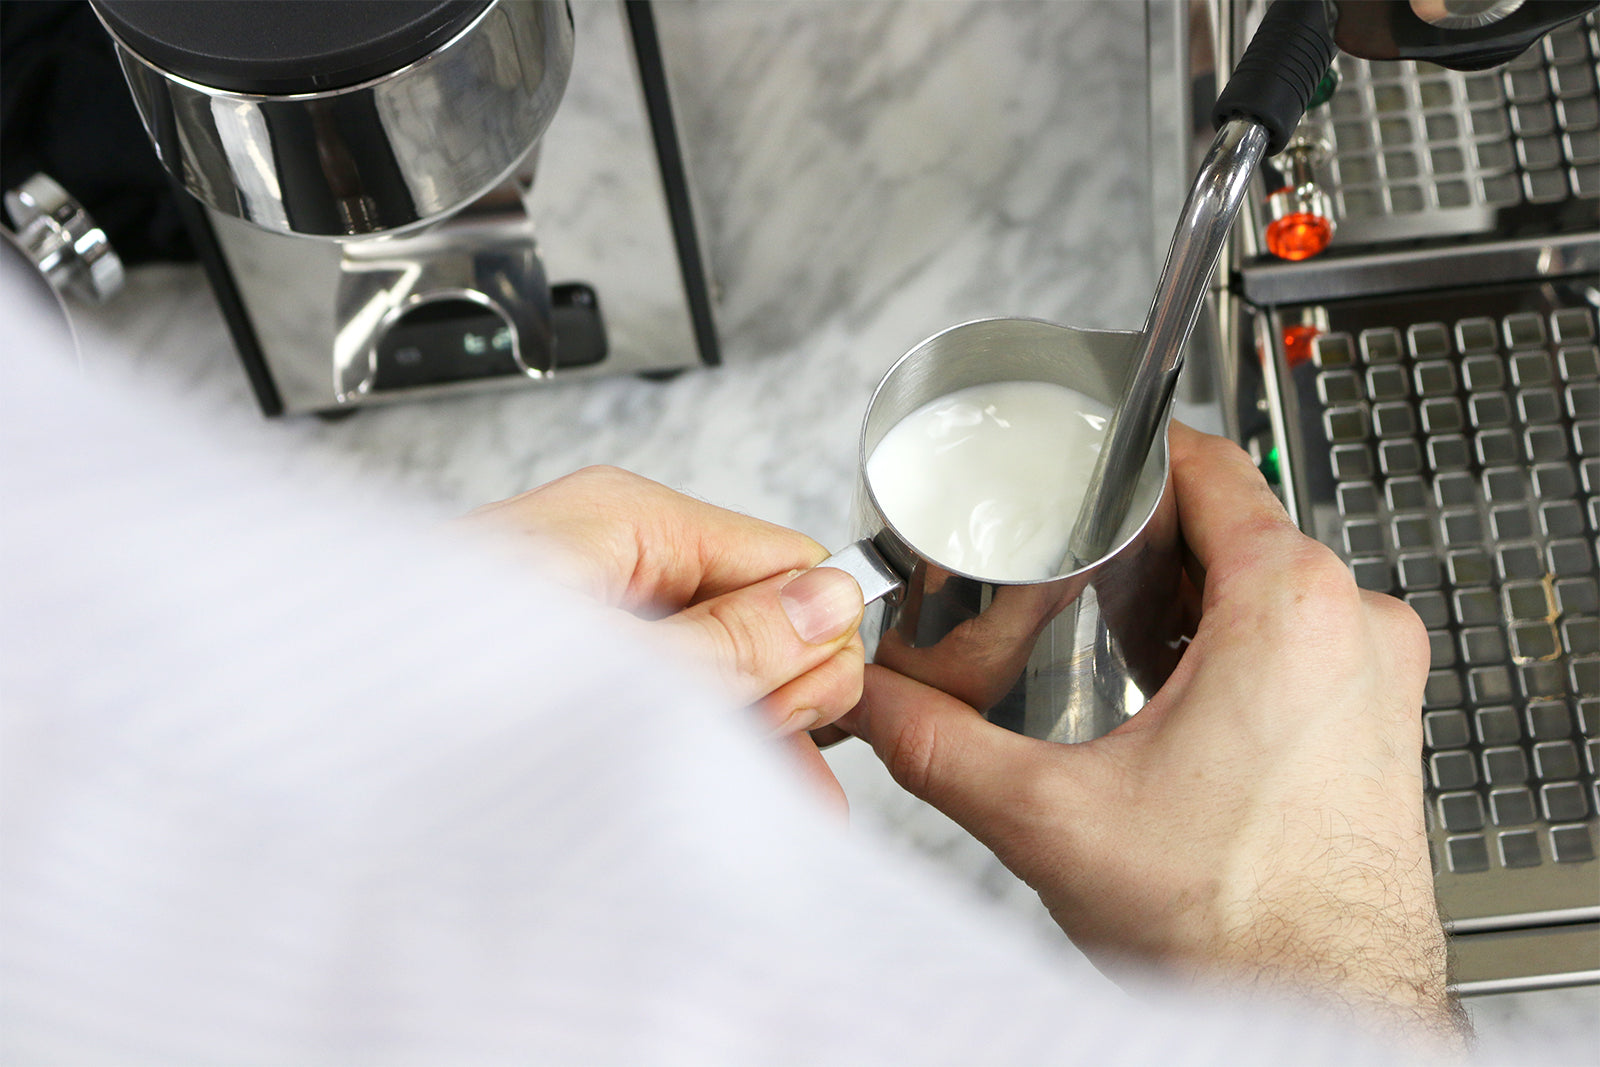 How To Steam Milk at Home With or Without a Wand